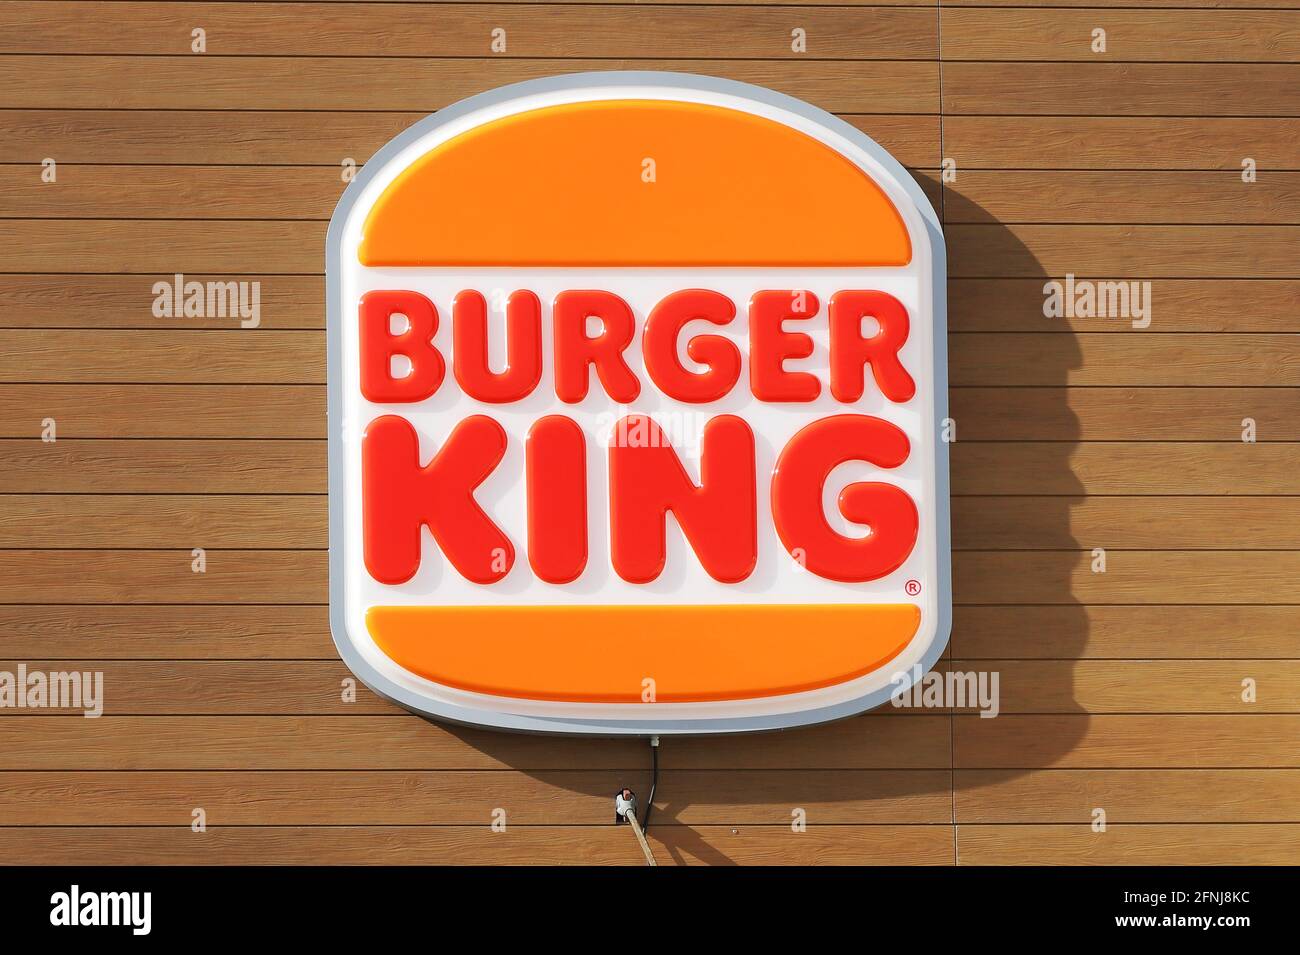 Eskilstuna, Sweden - April 17, 2021: The Burger King new rebranded logo attached to the fast-food restaurant wall. Stock Photo